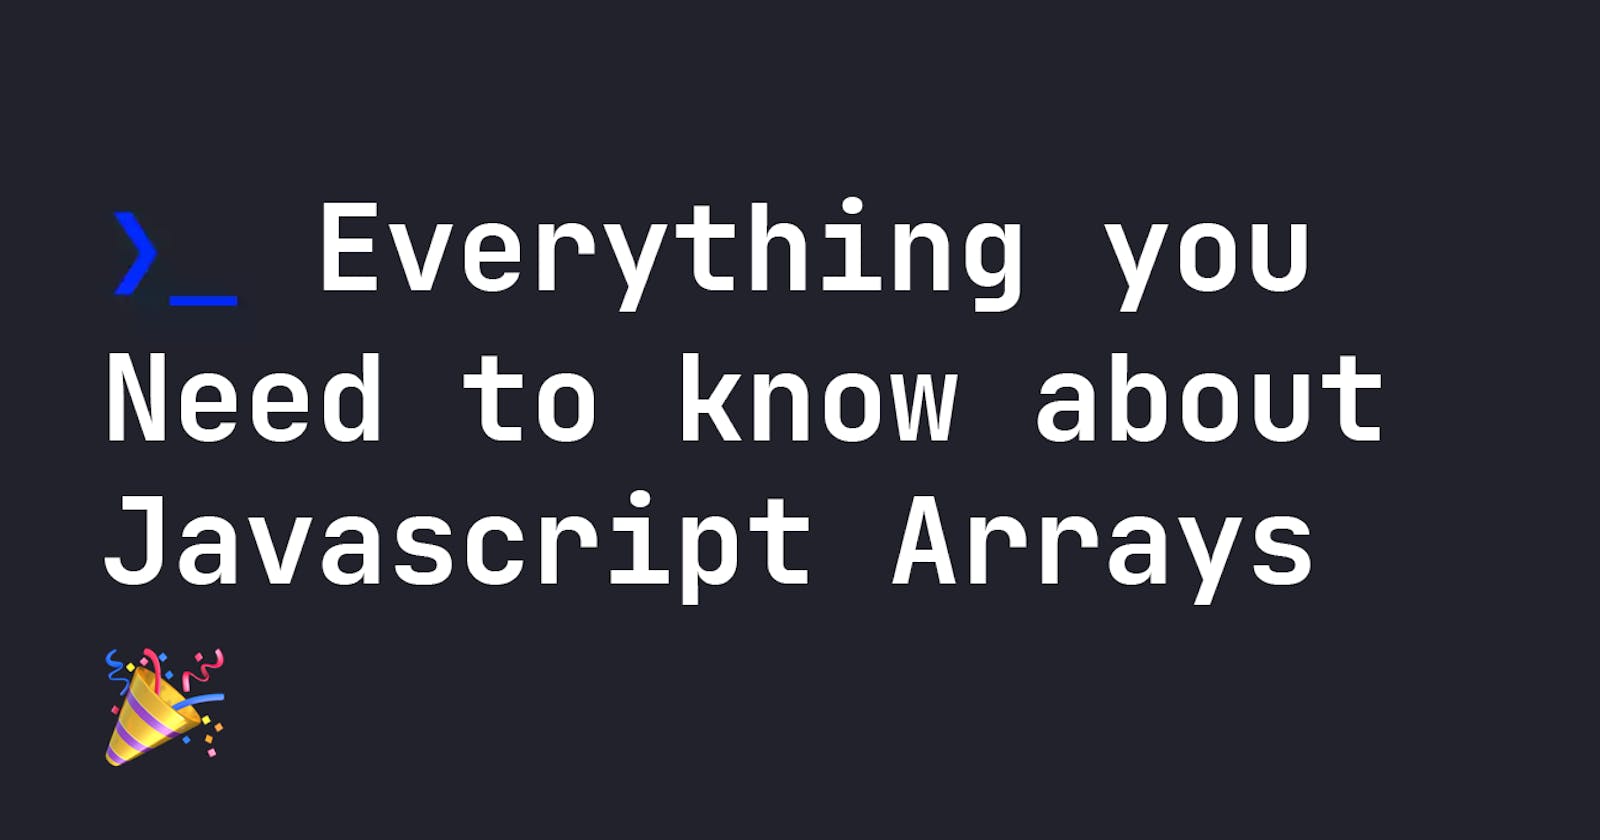 Everything you need to know about Javascript Arrays